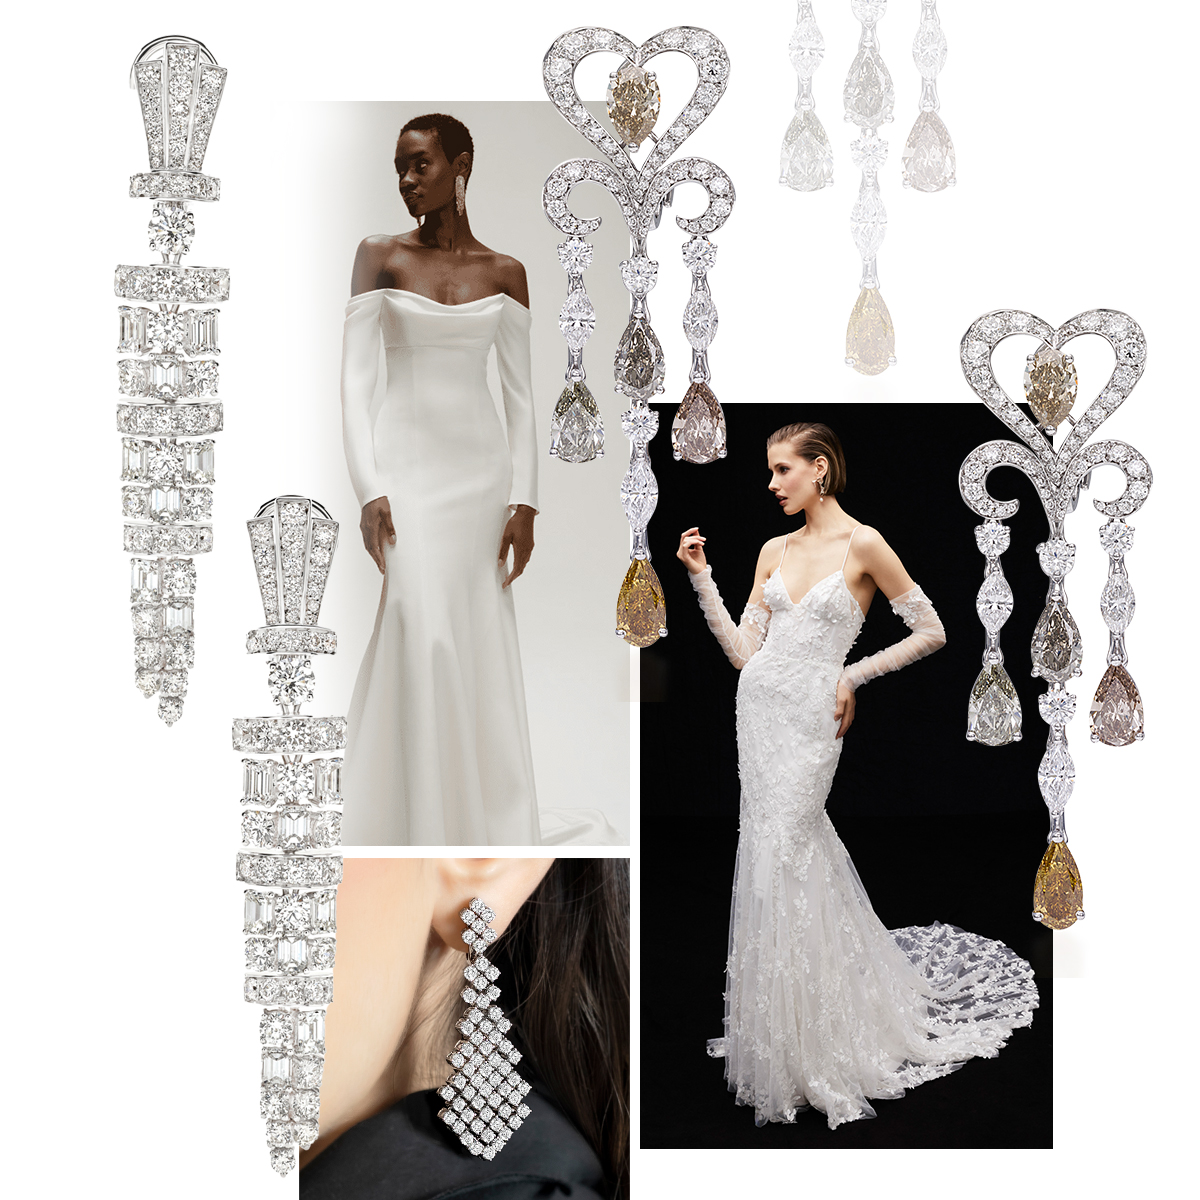 PICCHIOTTI jewelry collage with models. Clockwise from upper right – PICCHIOTTI Chandelier earrings, Alyne by Rita Vinieris F/W 2023, PICCHIOTTI Chandelier earrings, PICCHIOTTI Chandelier earrings, Jenny Yoo F/W 2023